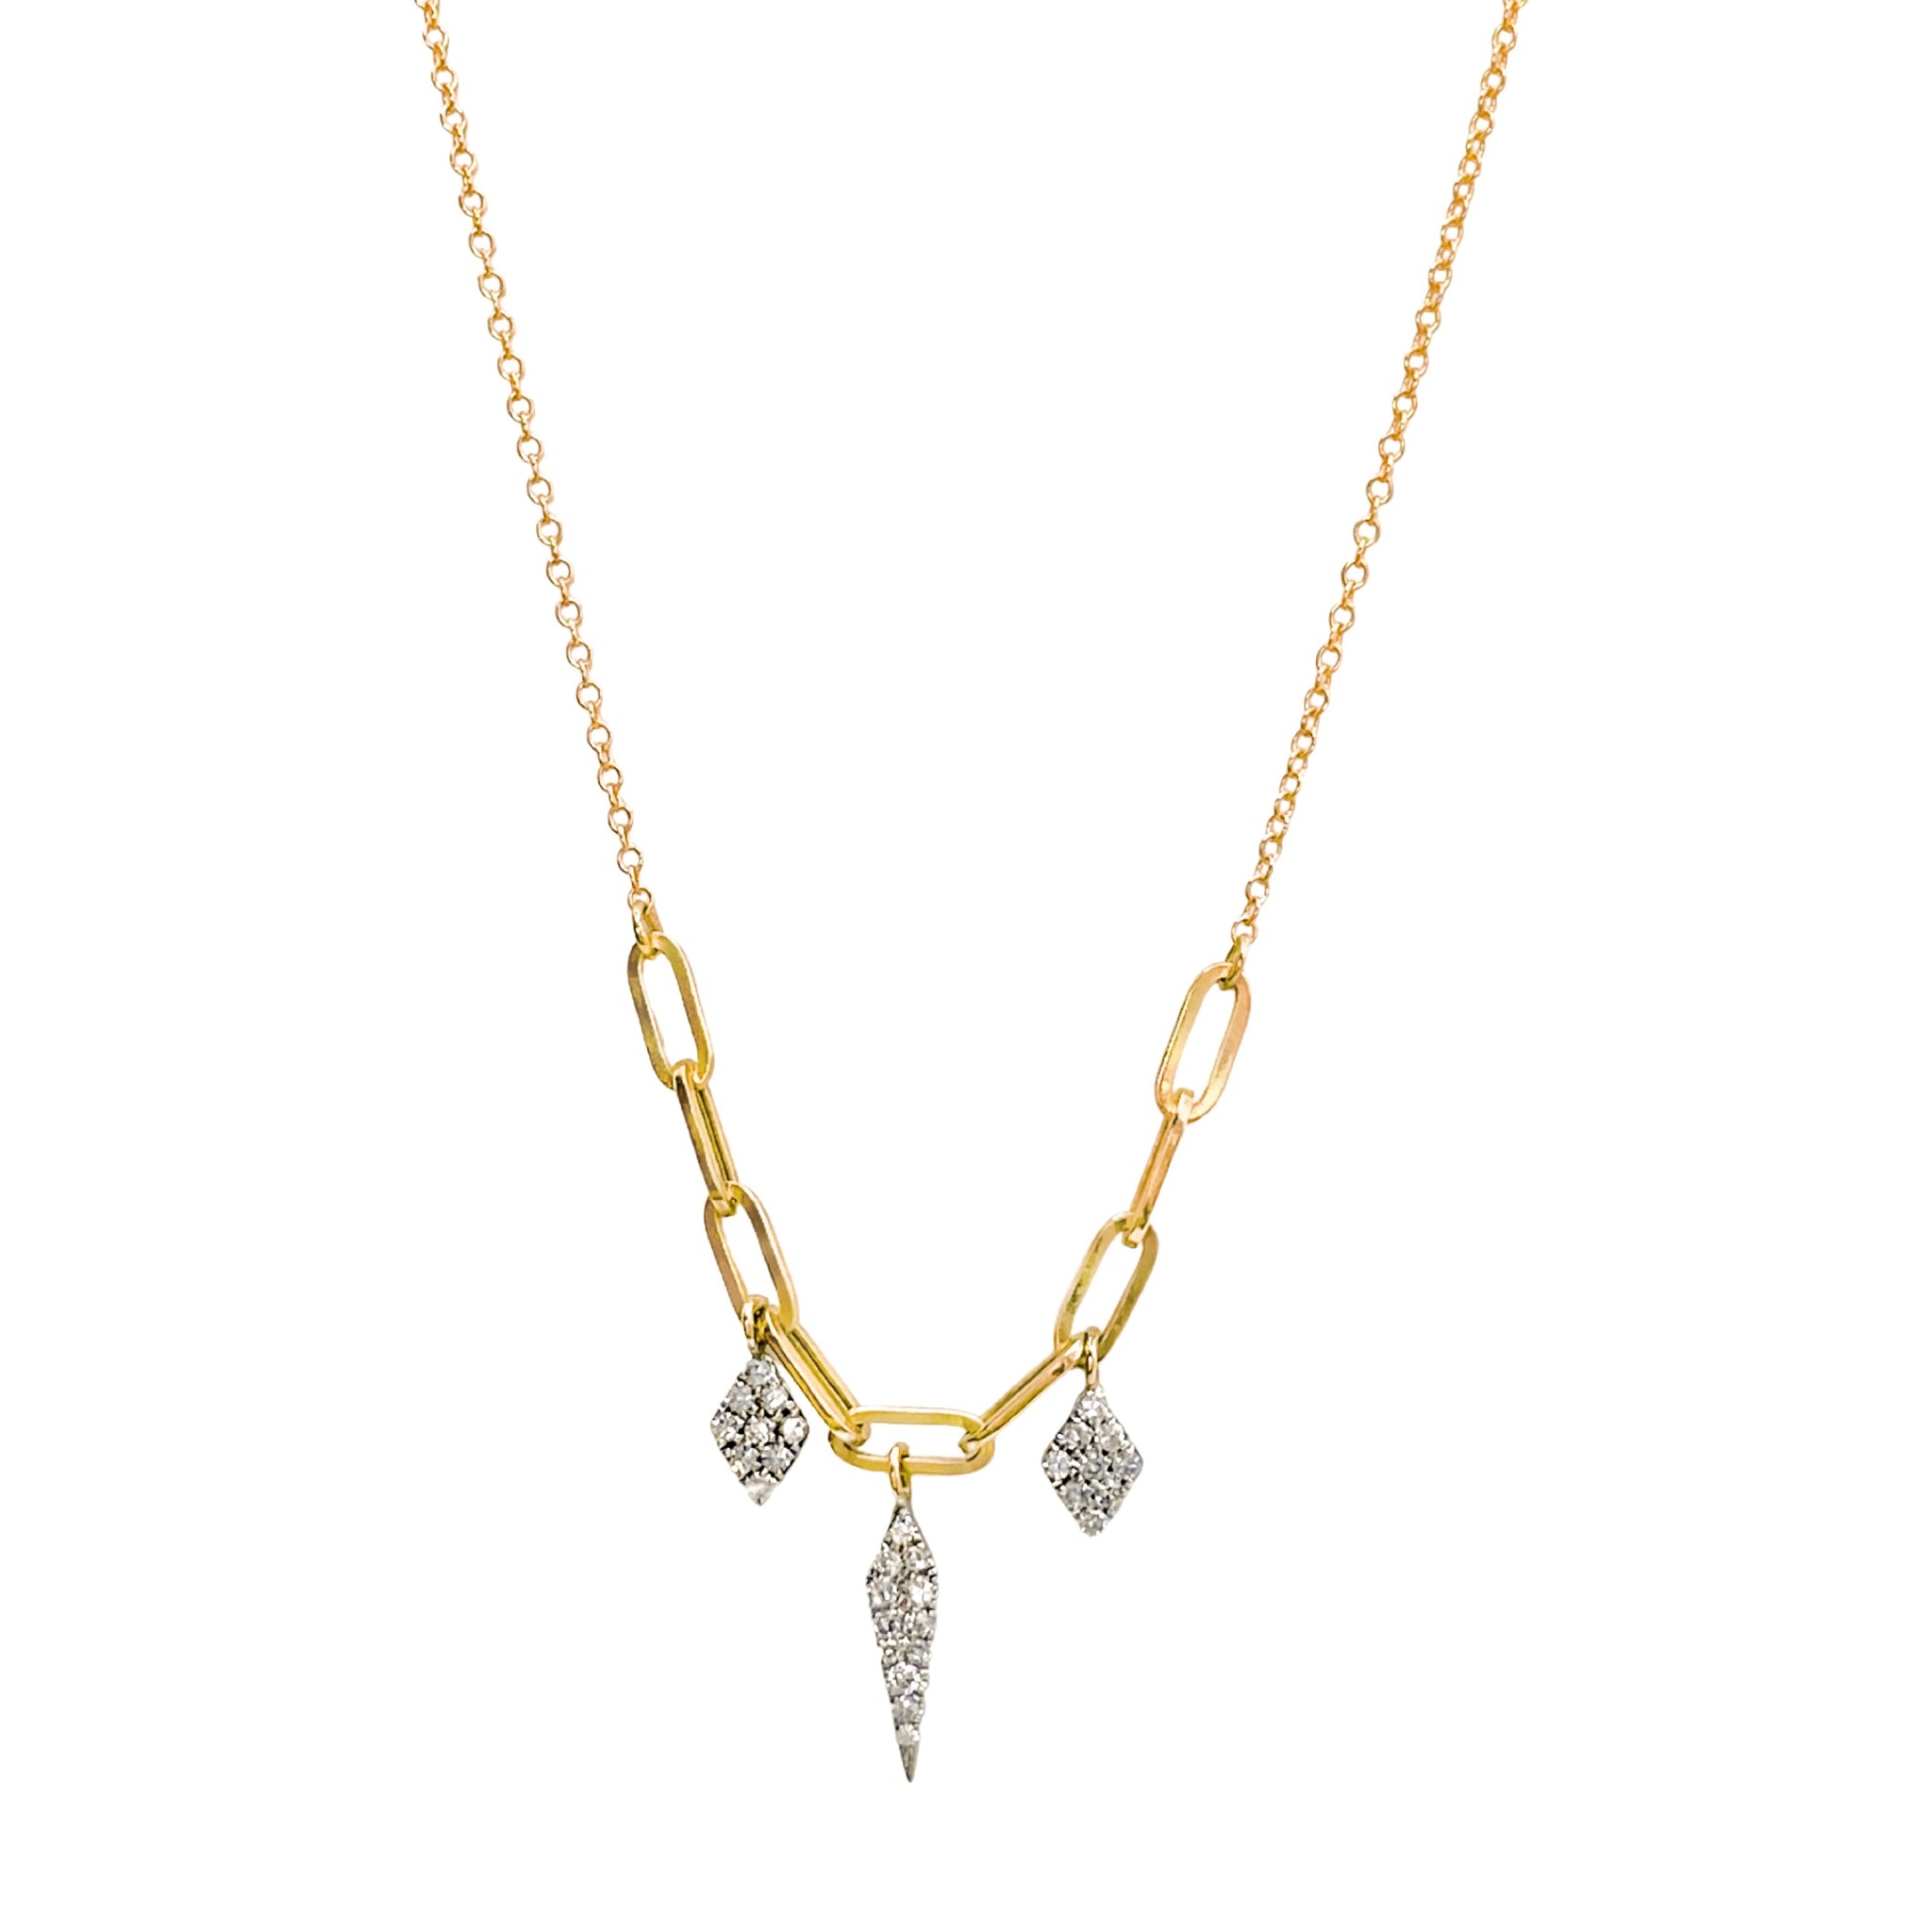 Meira T Diamond Charm Necklace available at Shaylula Jewlery & Gifts in Tarrytown, NY and online. This necklace by Meira T is the perfect mix of feminine and edgy. Pave diamond kite and dagger charms hang from a mix of yellow gold paperclip and delicate cable chain. You'll never want to take it off! • 14k, .16 ct dia • 16 - 18" L • Lobster clasp